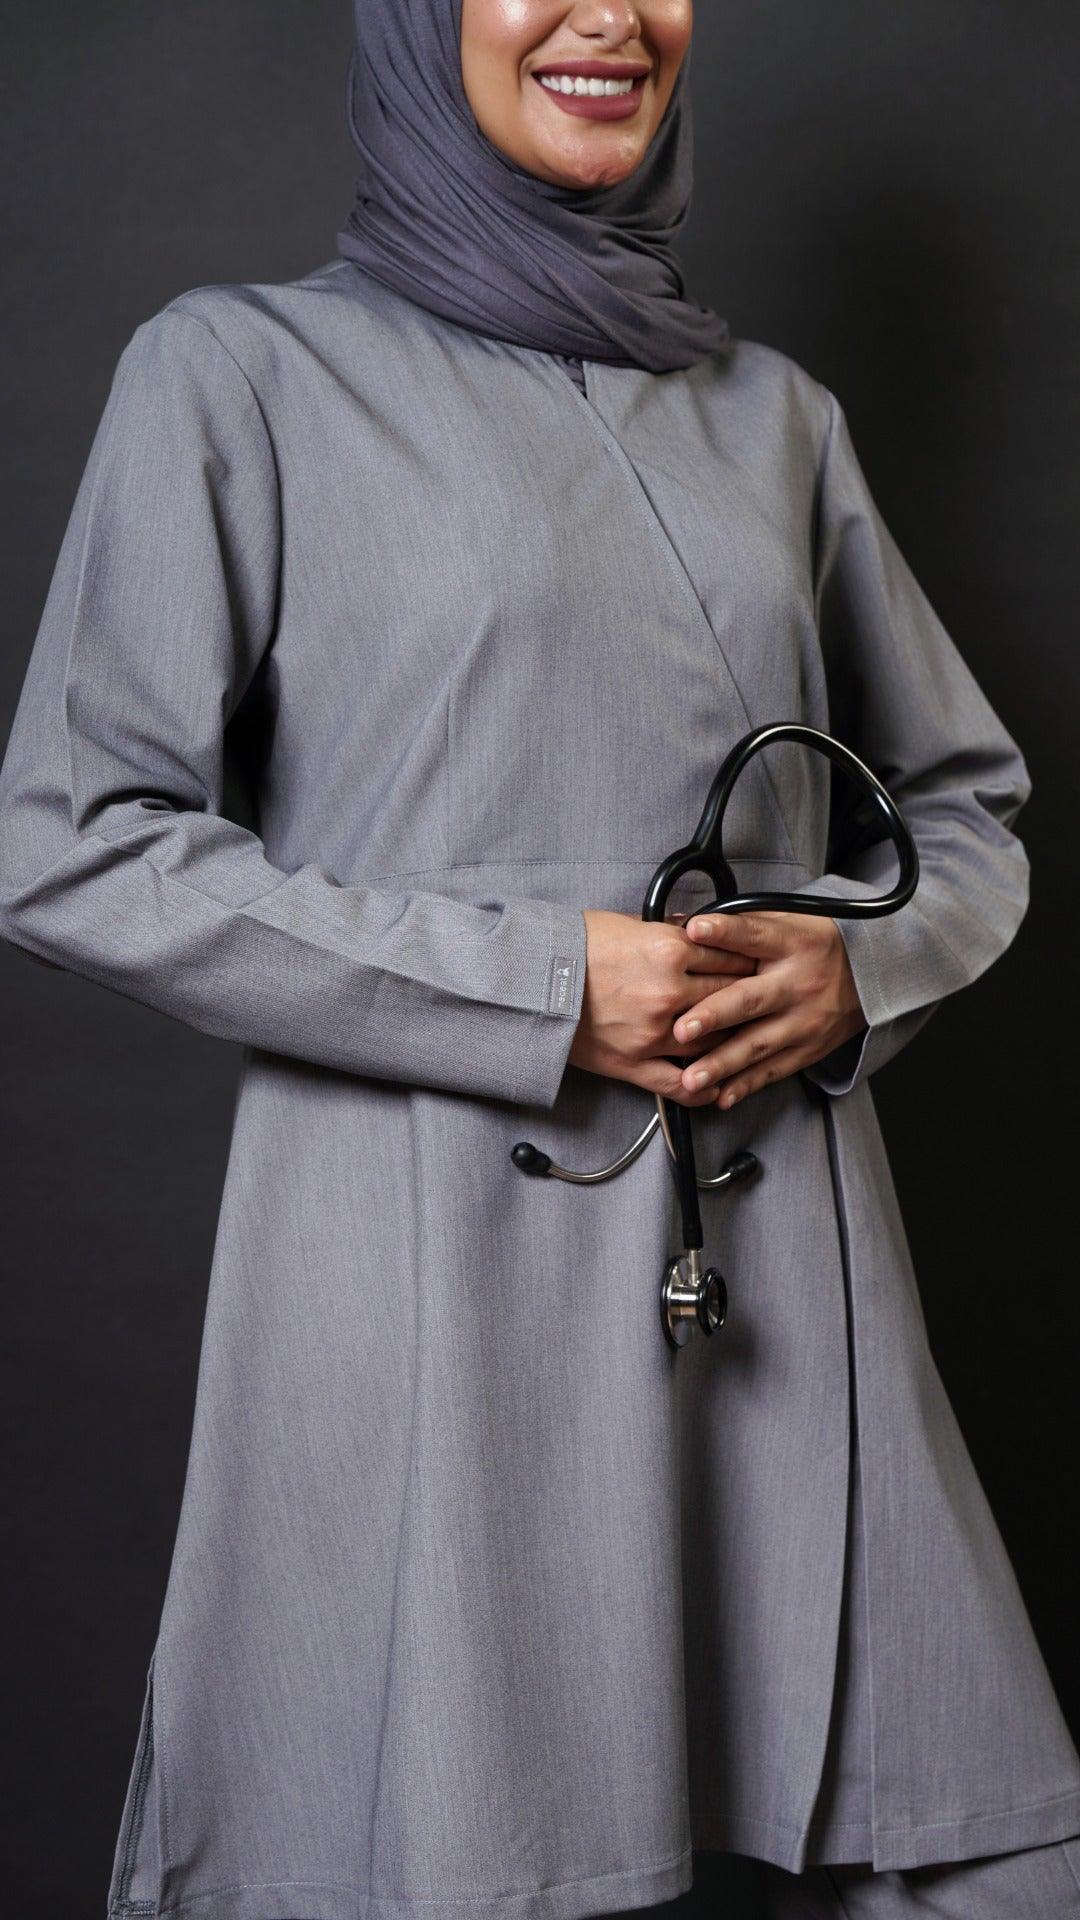   Extra long scrub top with long sleeves in grey perfect for women in healthcare! This top has a 36 inch length and flare top design for a modest look. It's also hijabi friendly, so you can feel comfortable and cover the lower bottom.